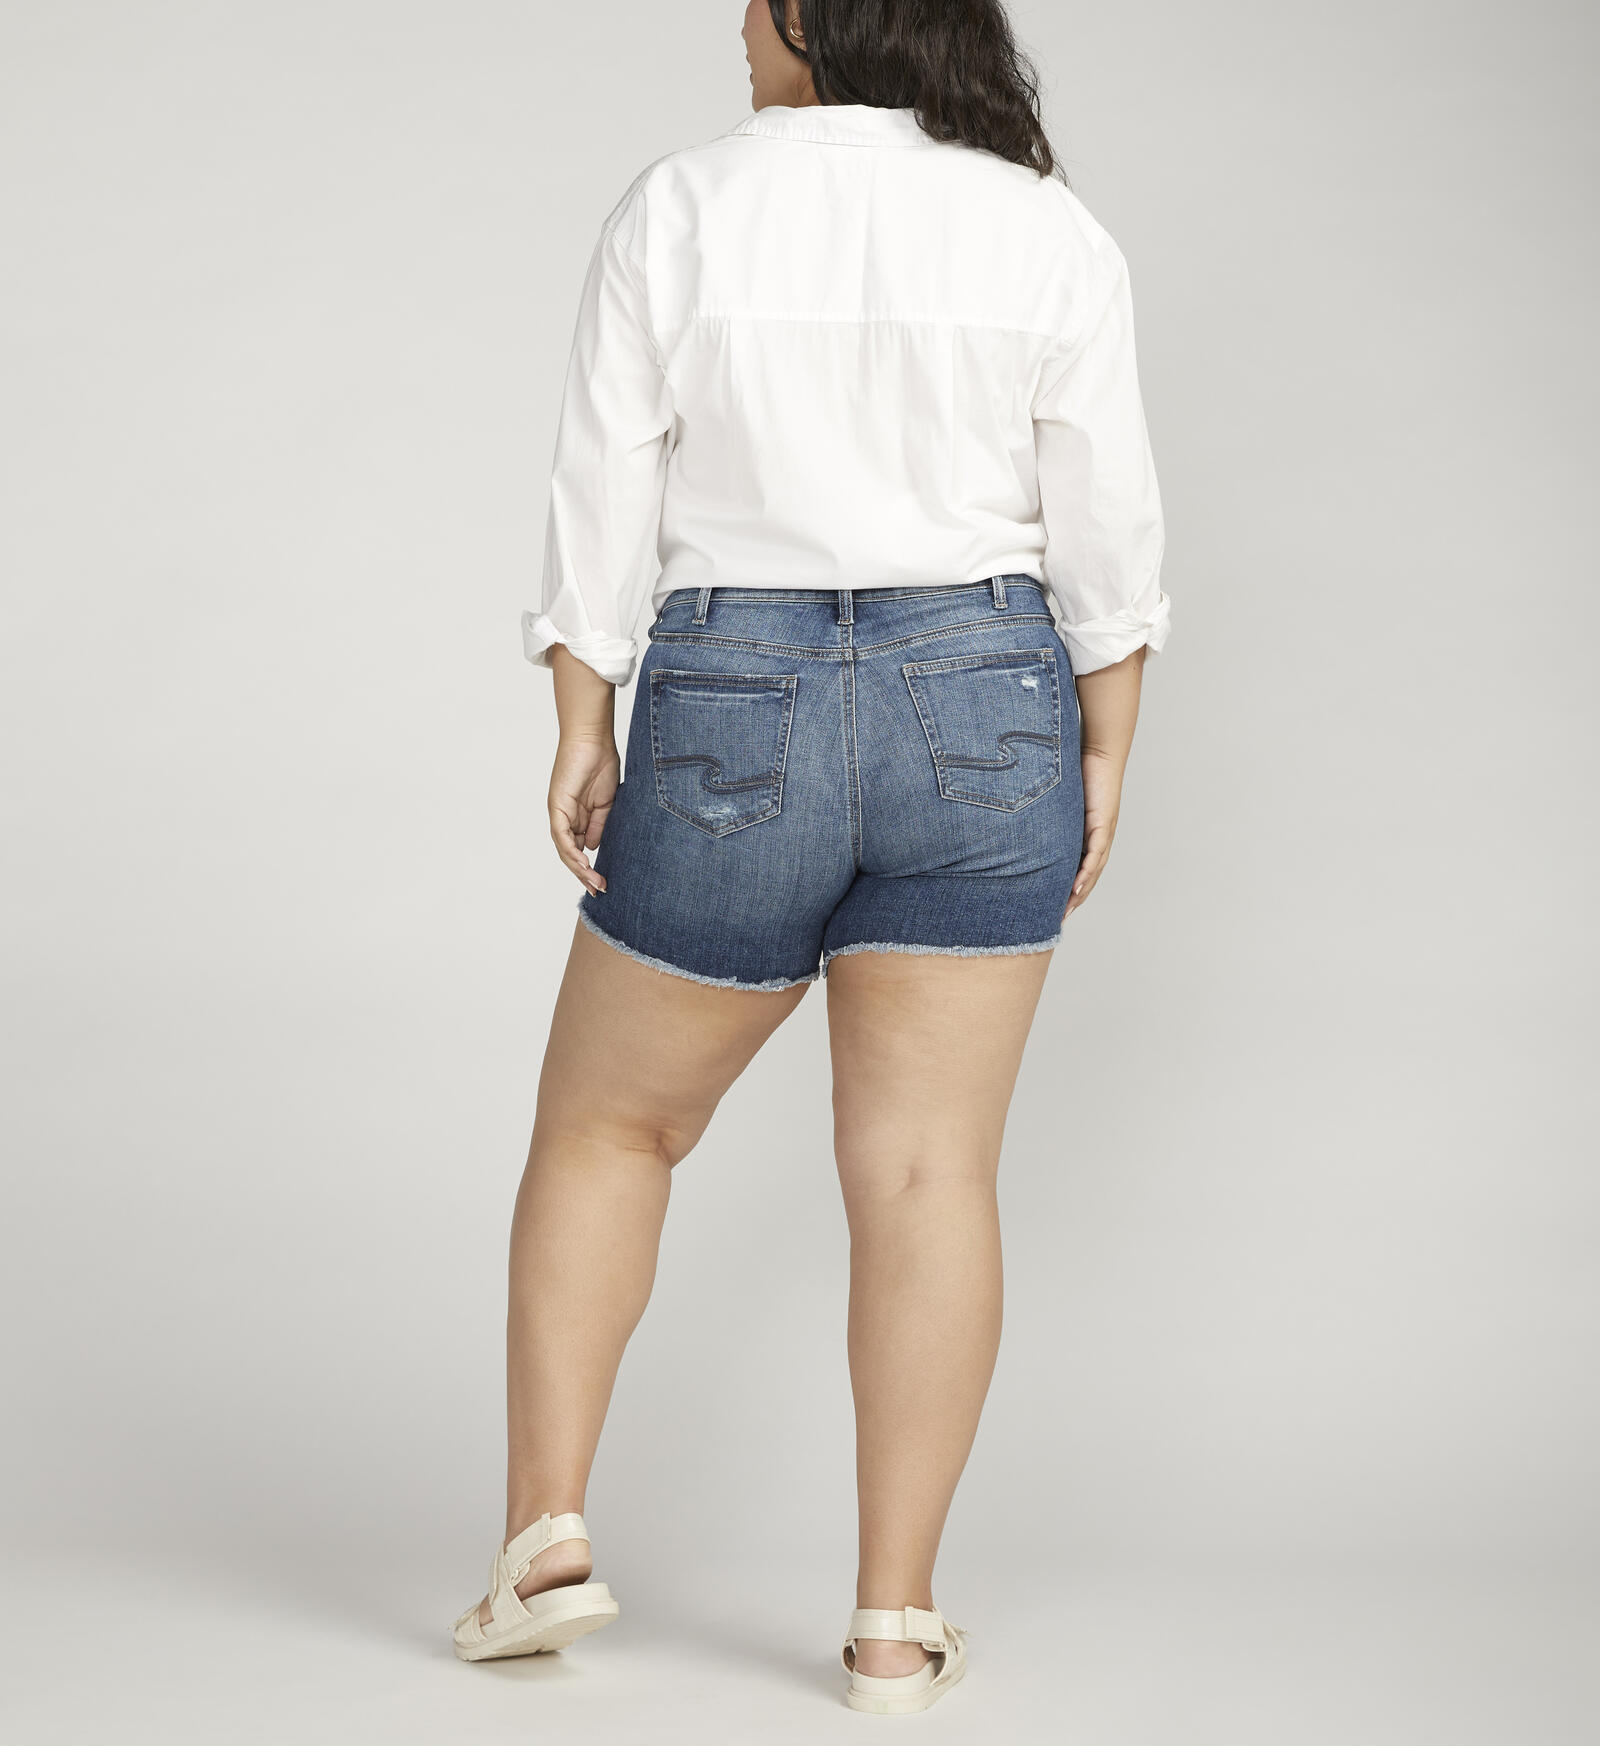 Buy Suki Mid Rise Short Plus Size for CAD 48.00